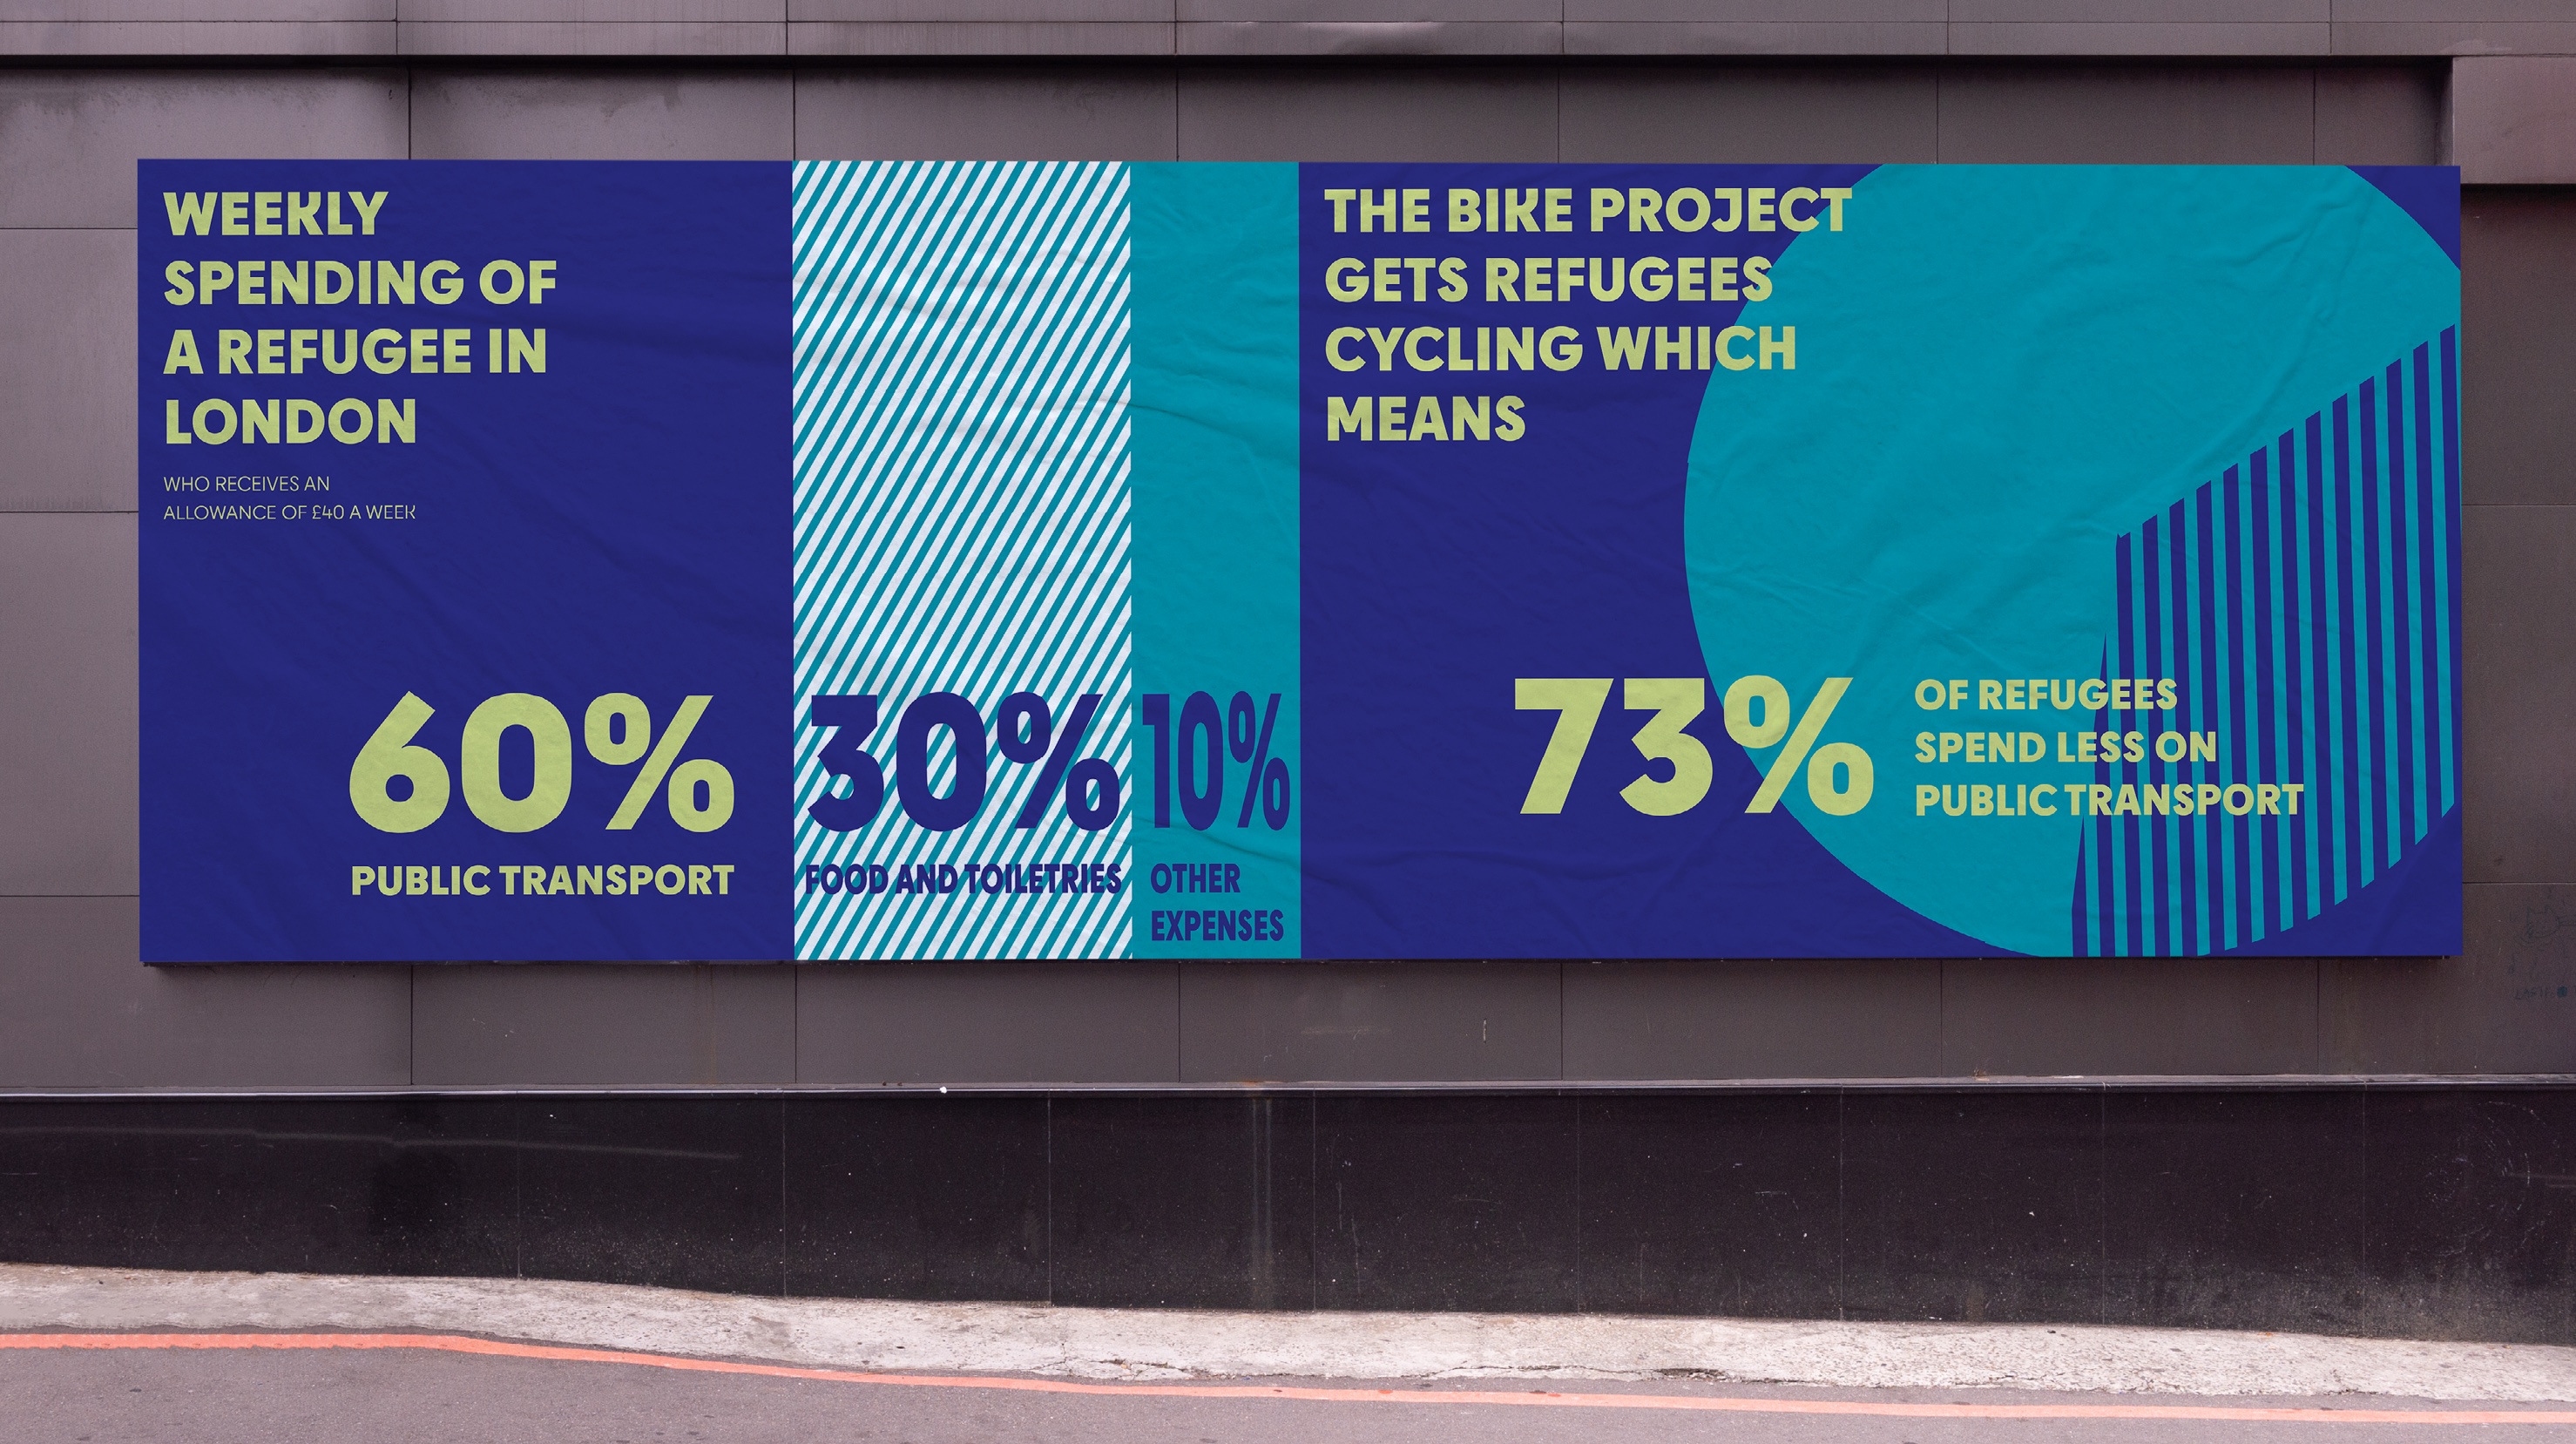 BA Graphic Design work by Kristina Roll showing a banner showing information explaining the cause of the charity that provides free bikes to refugees and asylum seekers in London